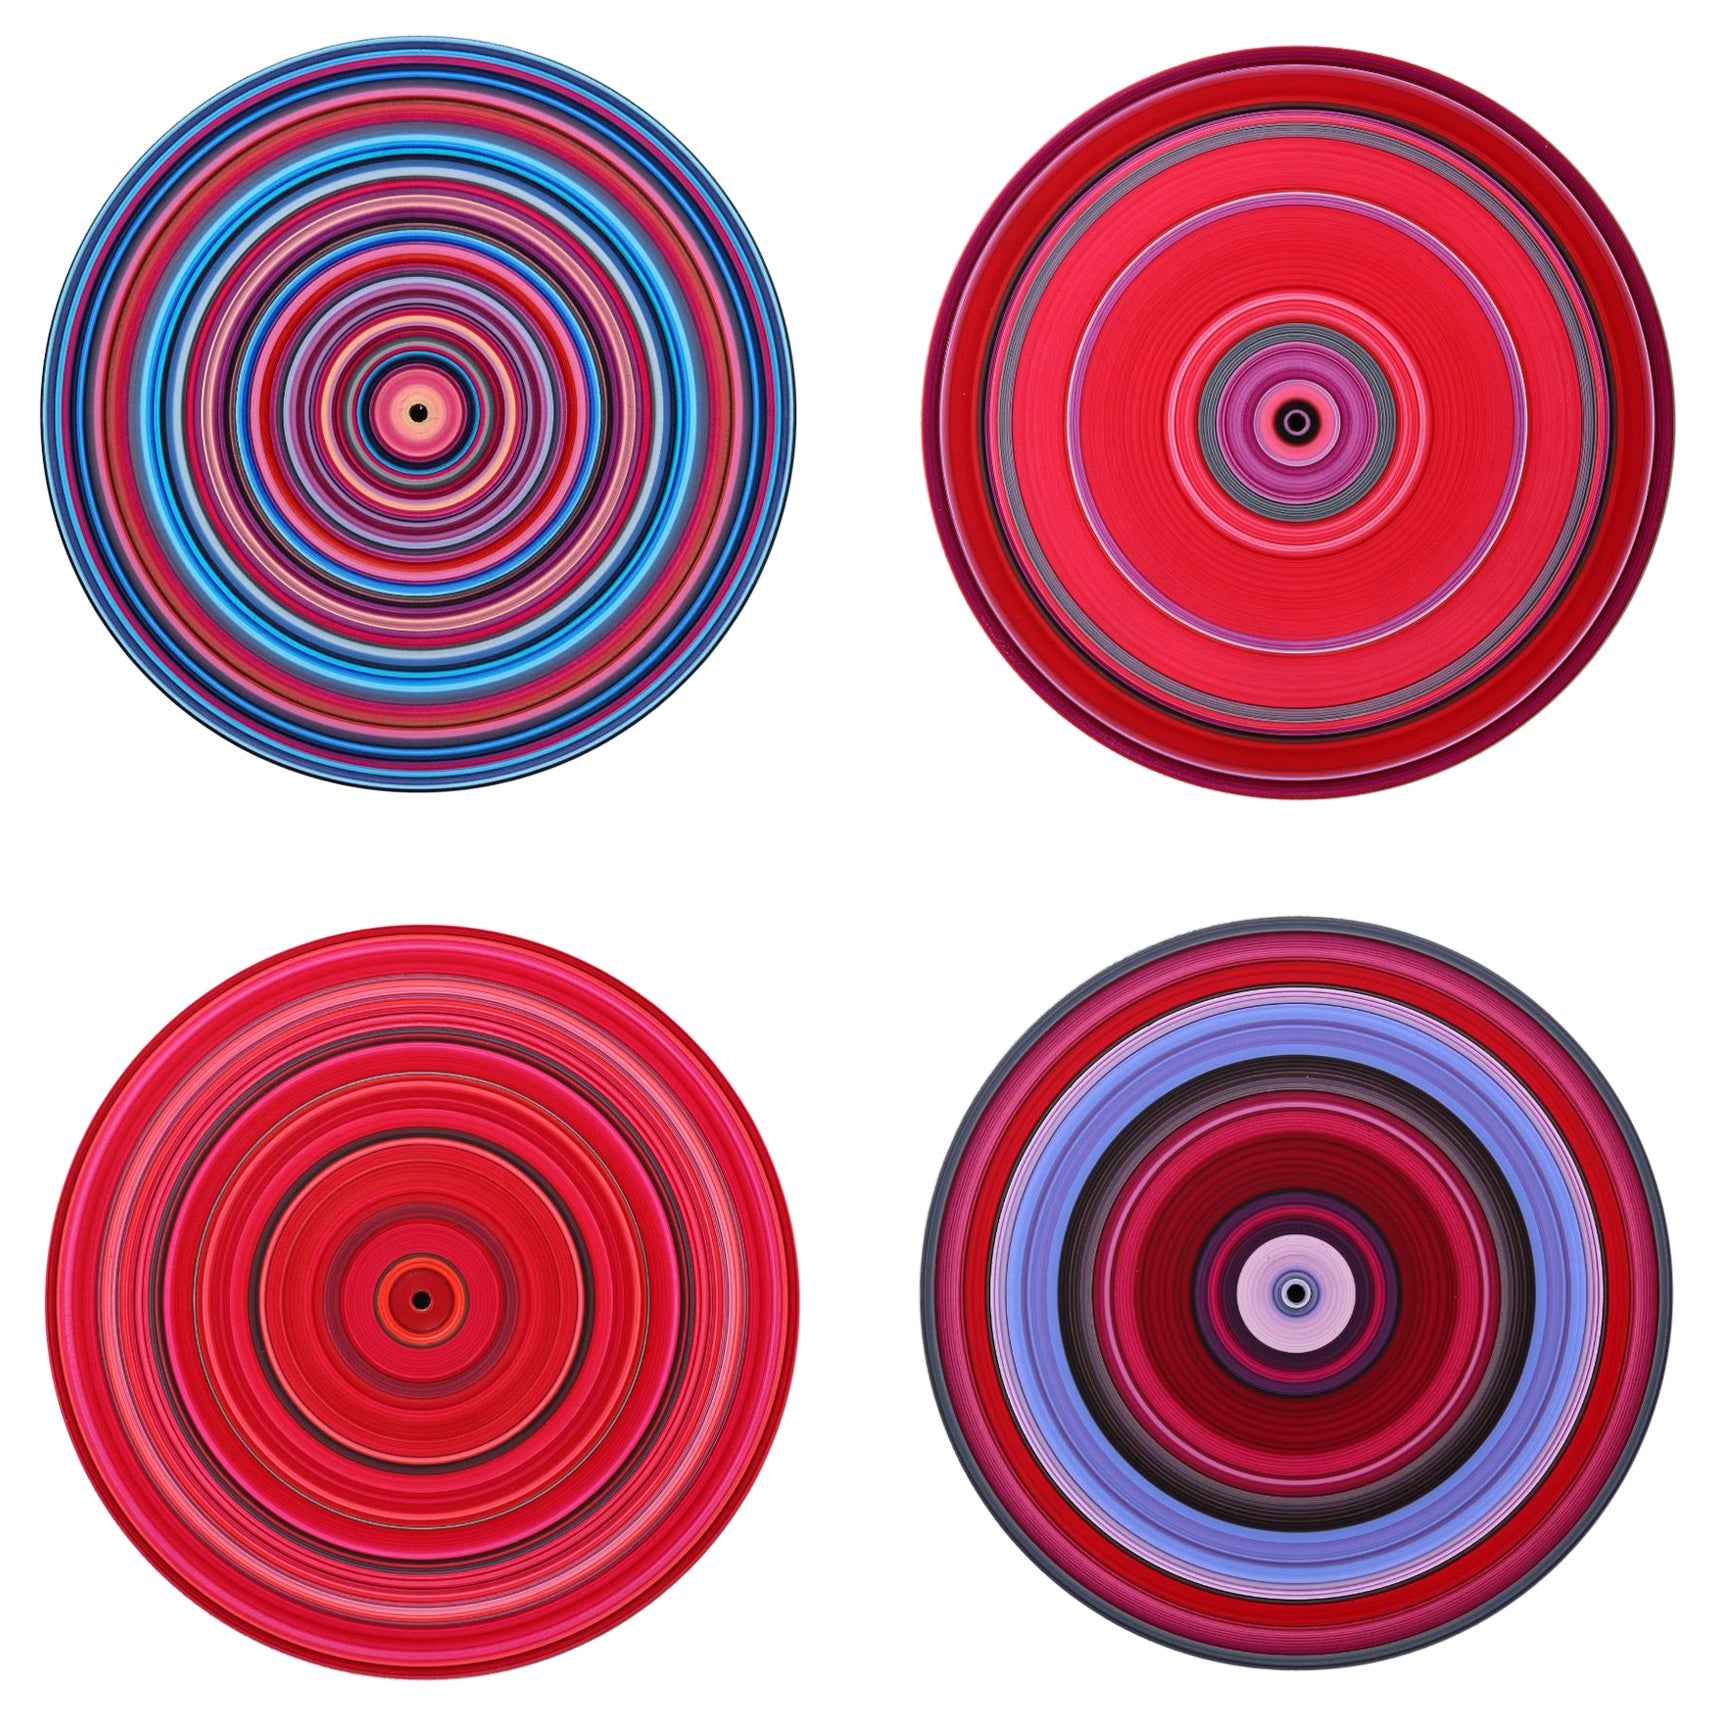 SOUND AND VISION – Song for Tamlyn is a unique oil on vinyl installation by German contemporary artist Doris Marten, dimensions are 65 × 65 cm (25.6 × 25.6 in). Every piece is 30 cm in diameter (11.8 in).
The artwork is signed, sold unframed and